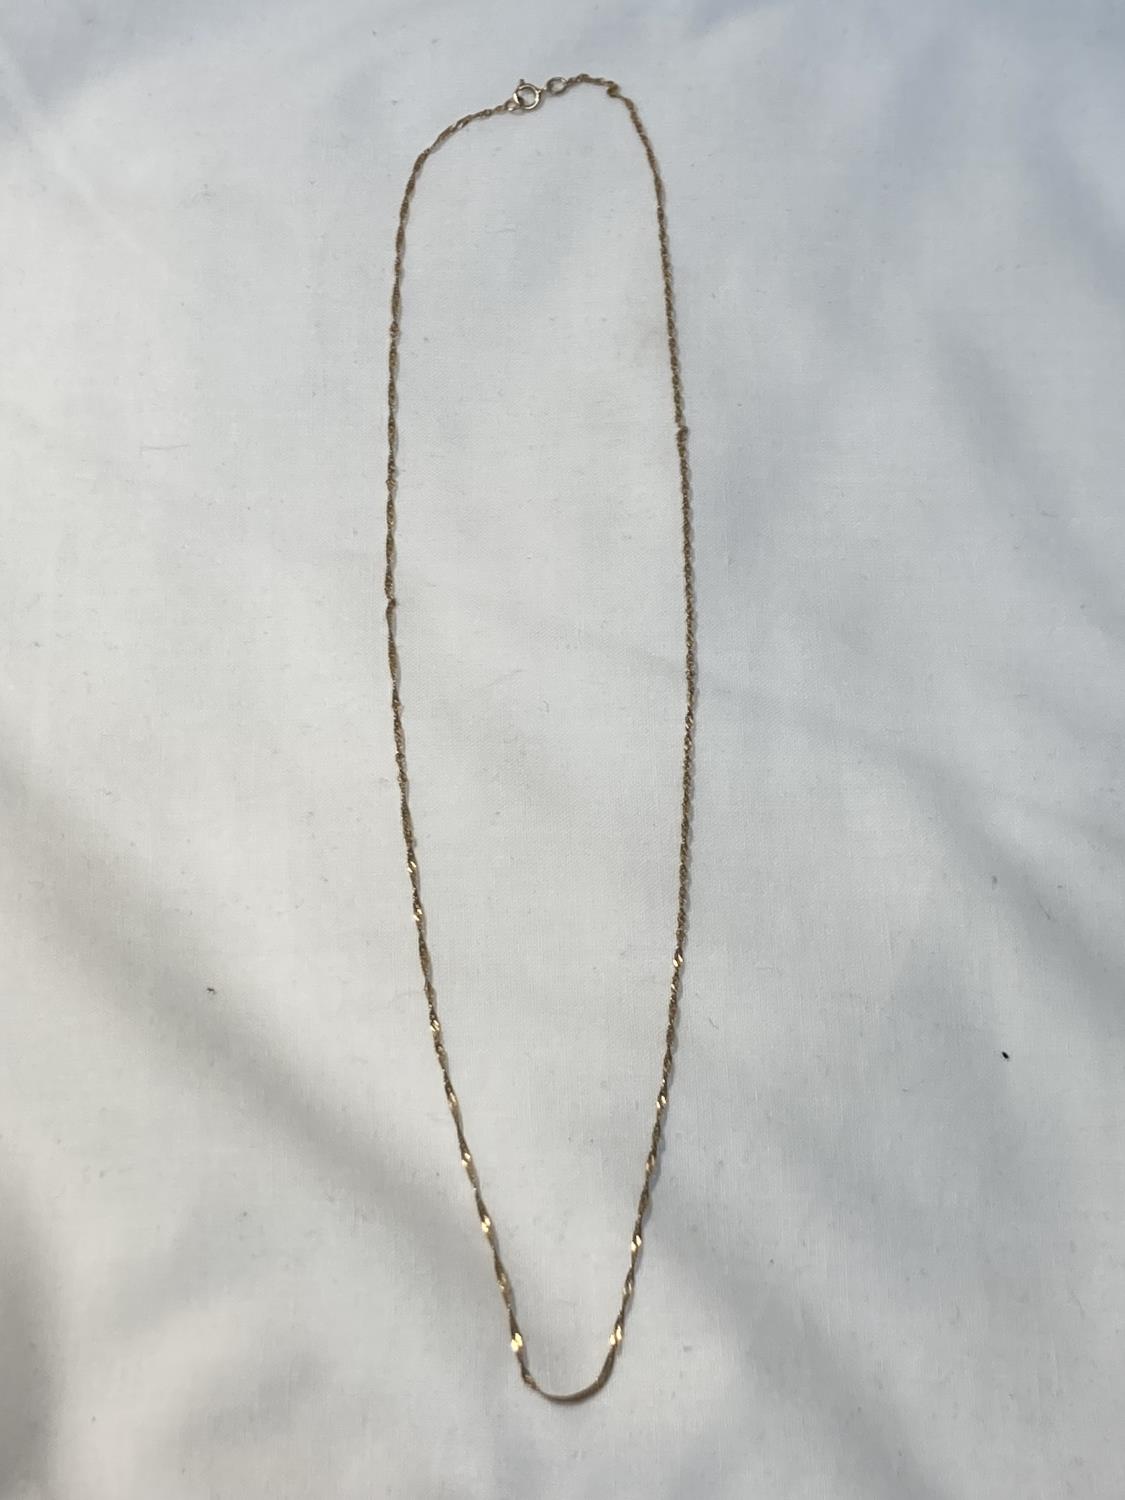 A 9CT GOLD NECKLACE WEIGHT 0.9G - Image 2 of 2